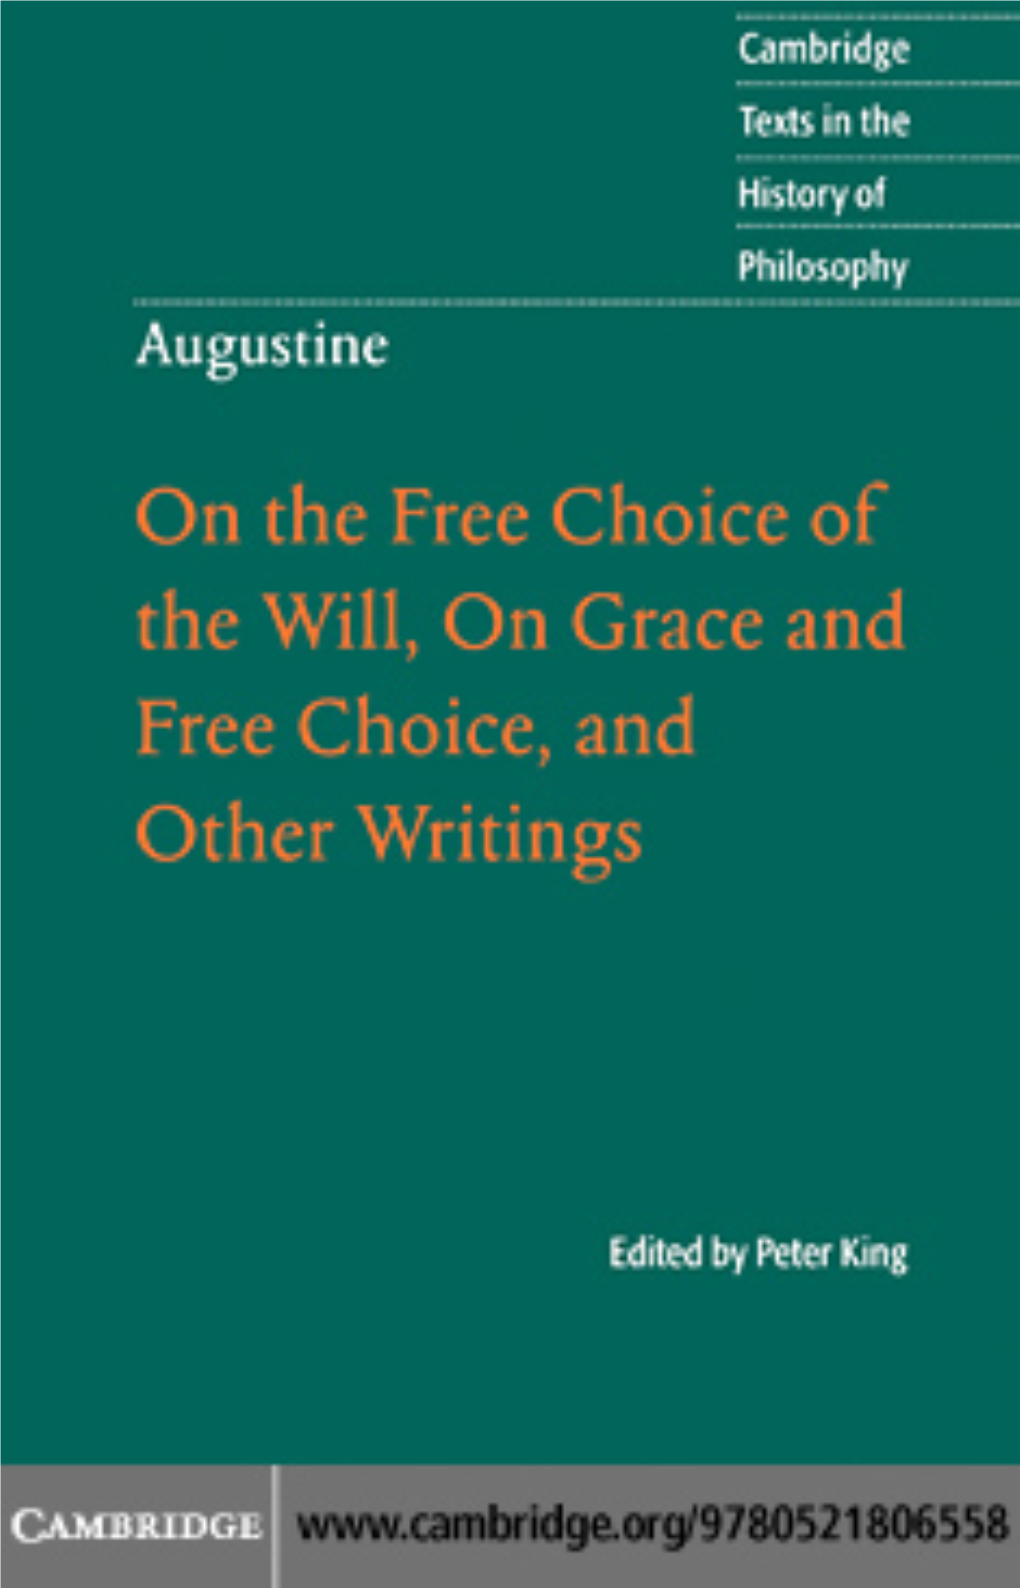 AUGUSTINE on the Free Choice of the Will, on Grace and Free Choice, and Other Writings Cambridge Texts in the History of Philosophy